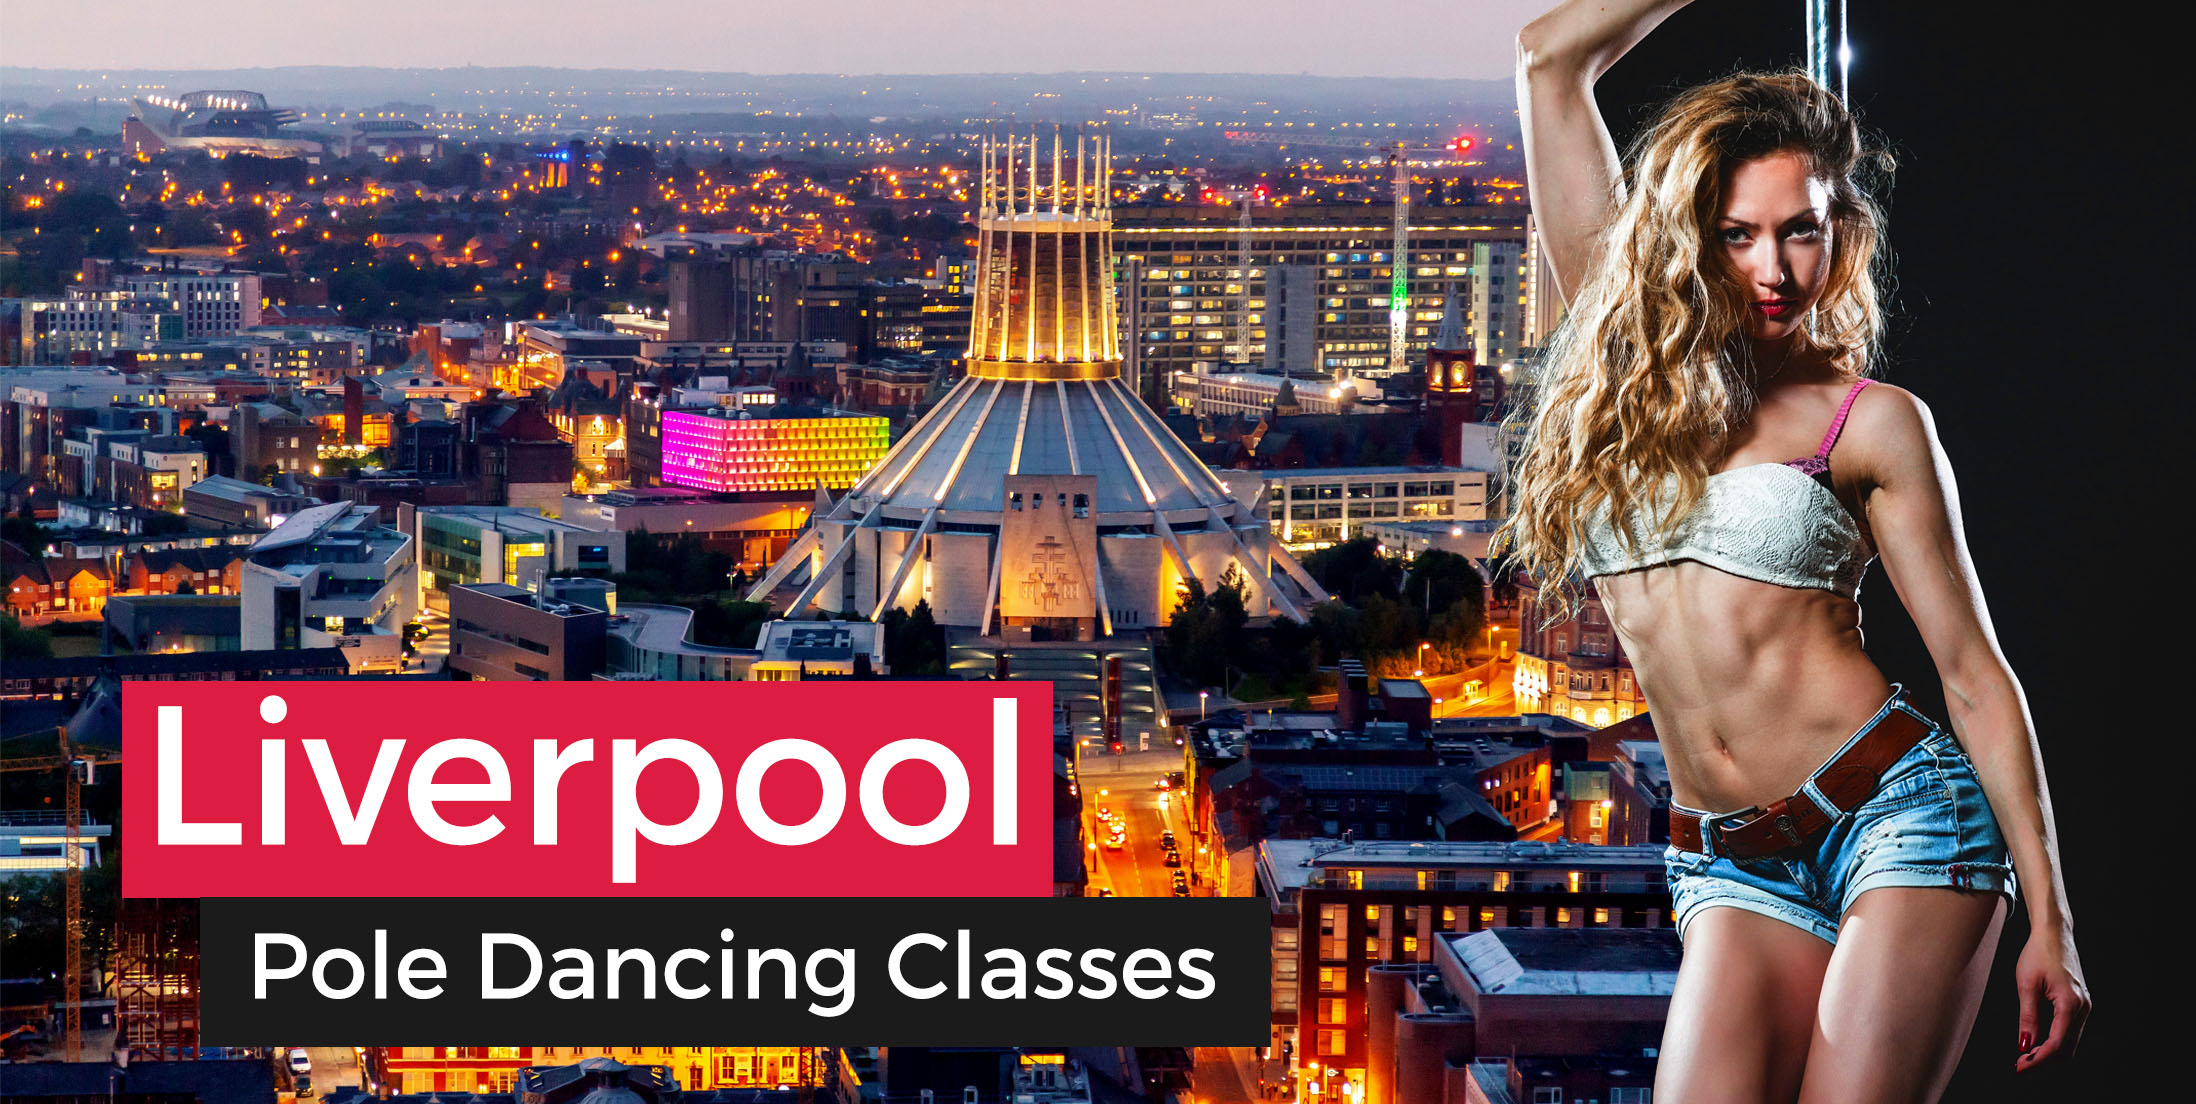 Pole Dancing Classes in Liverpool